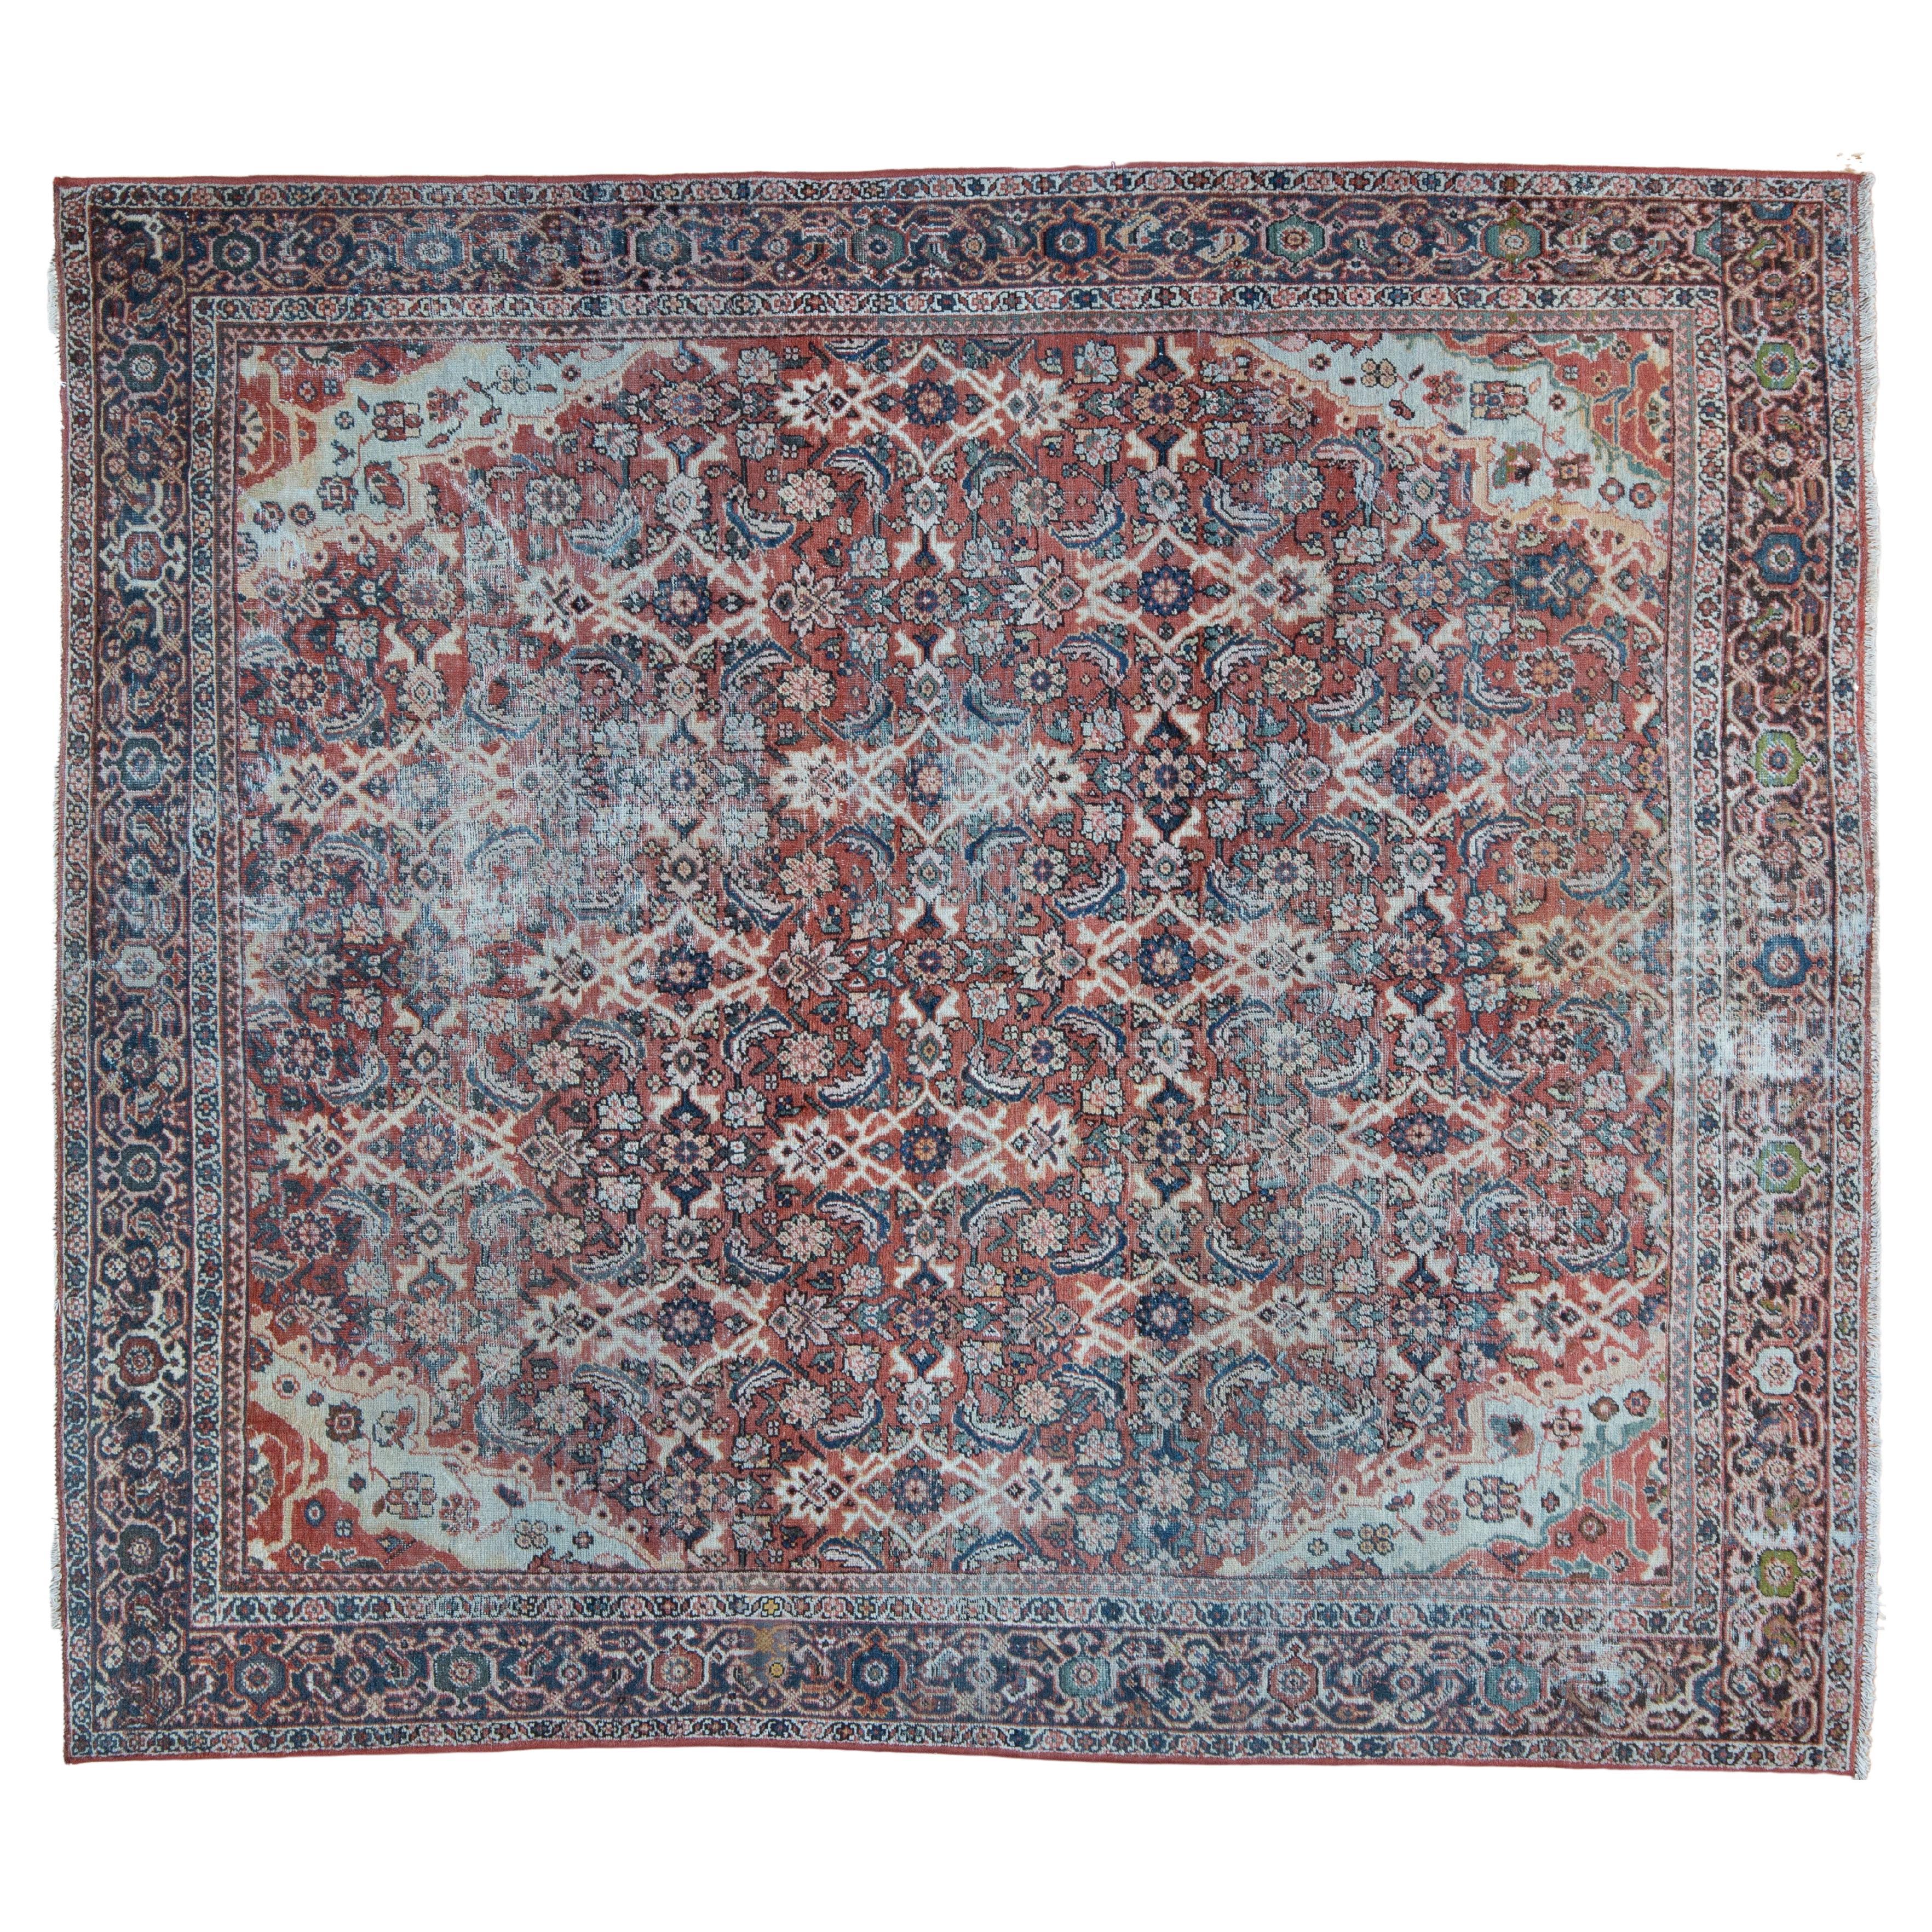 Distressed Antique Persian Mahal Tribal Square Rug c. 1900s For Sale